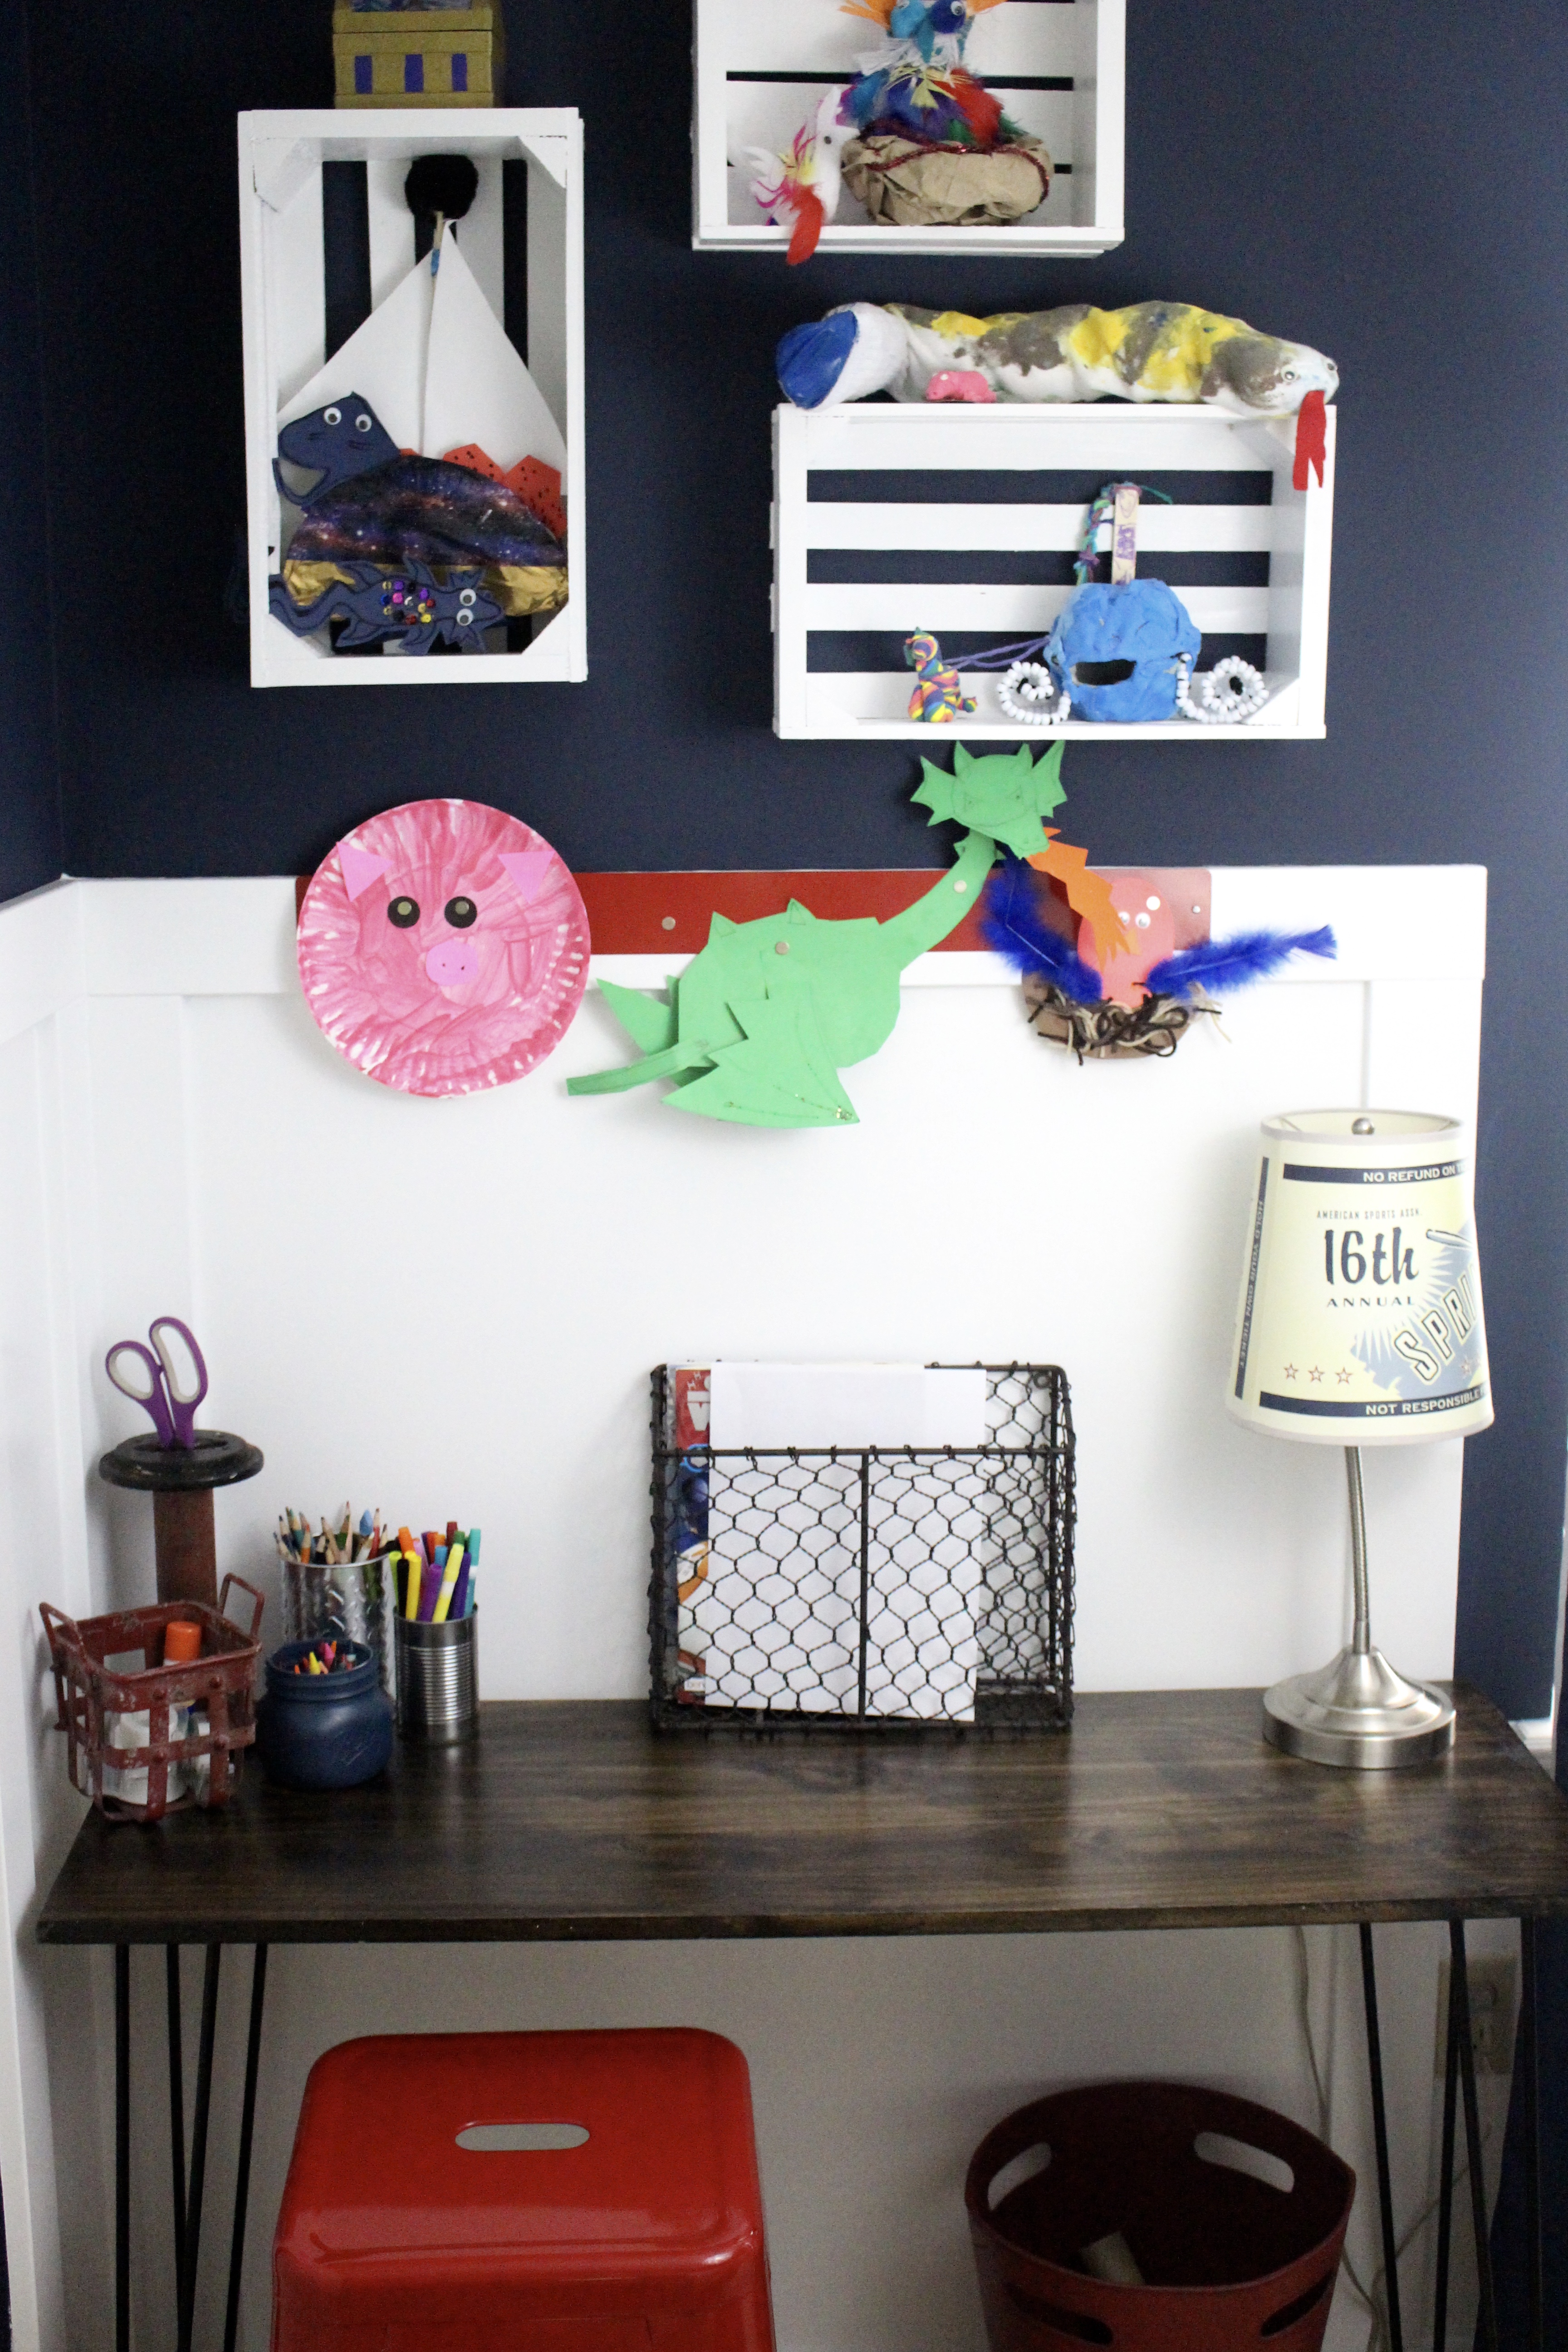 DIY Desk area in a small space bedroom by www.whitecottagehomeandliving.com